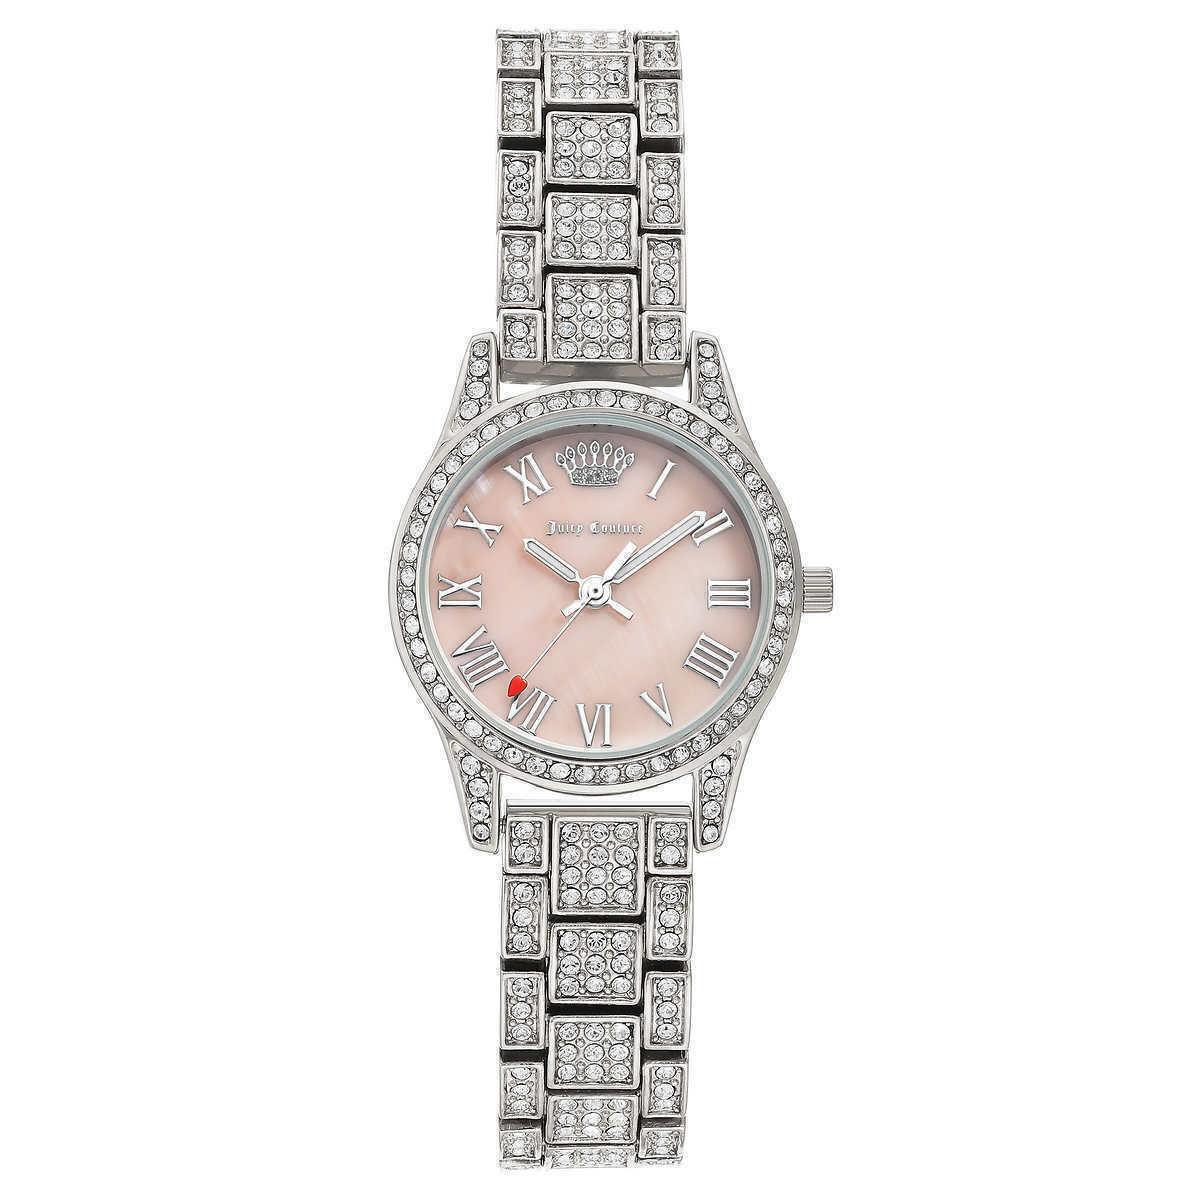 Juicy Couture JC/1261PMSV Black Label Pink Mother-of-pearl Dial Ladies Watch - Pink mother-of-pearl Dial, Silver Band